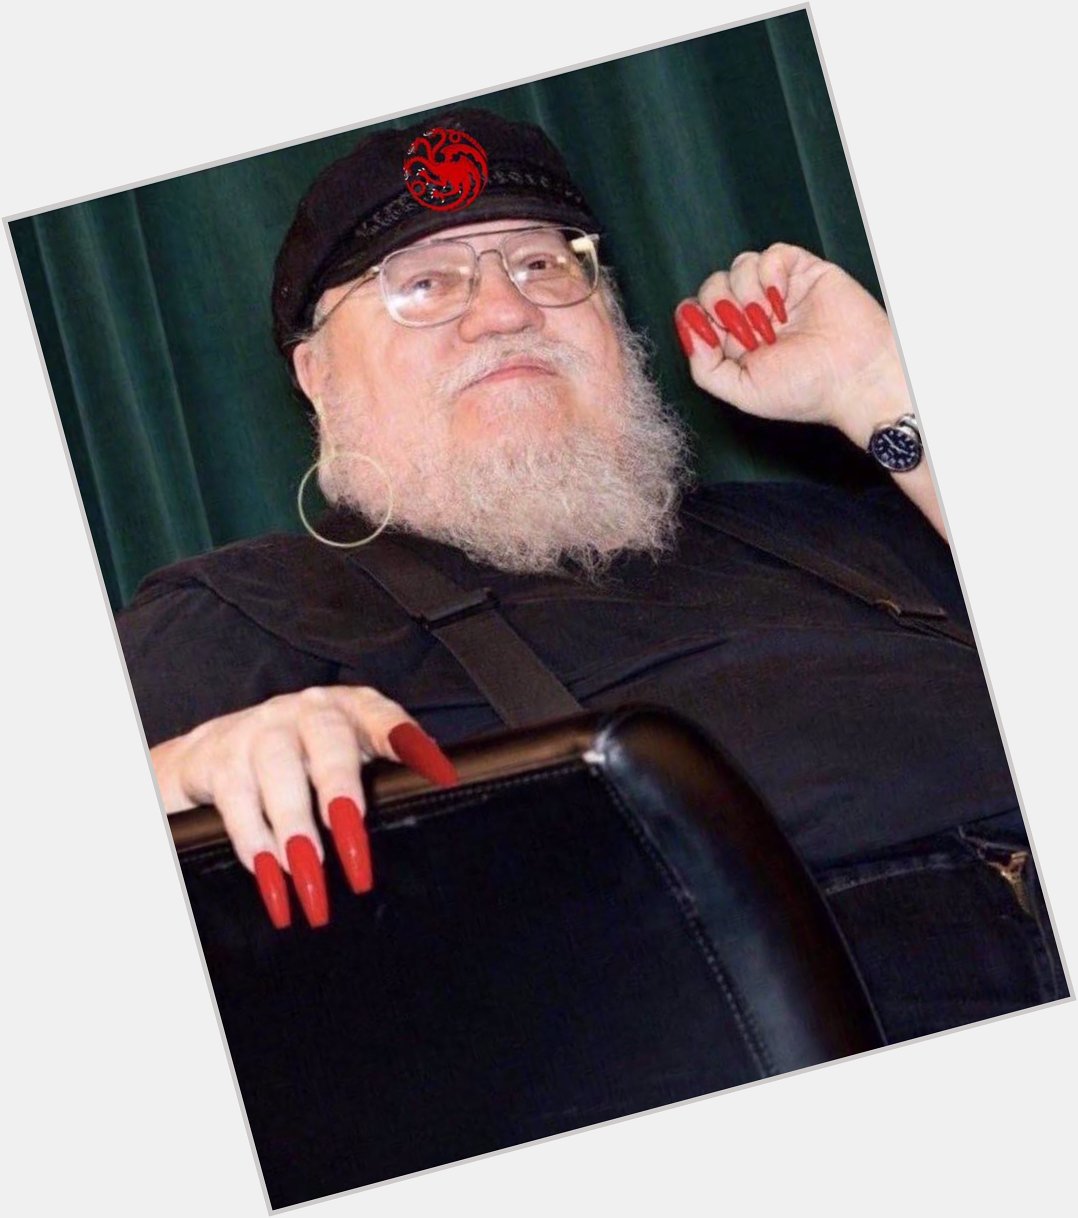 We are honouring an icon today, happy birthday George RR Martin 